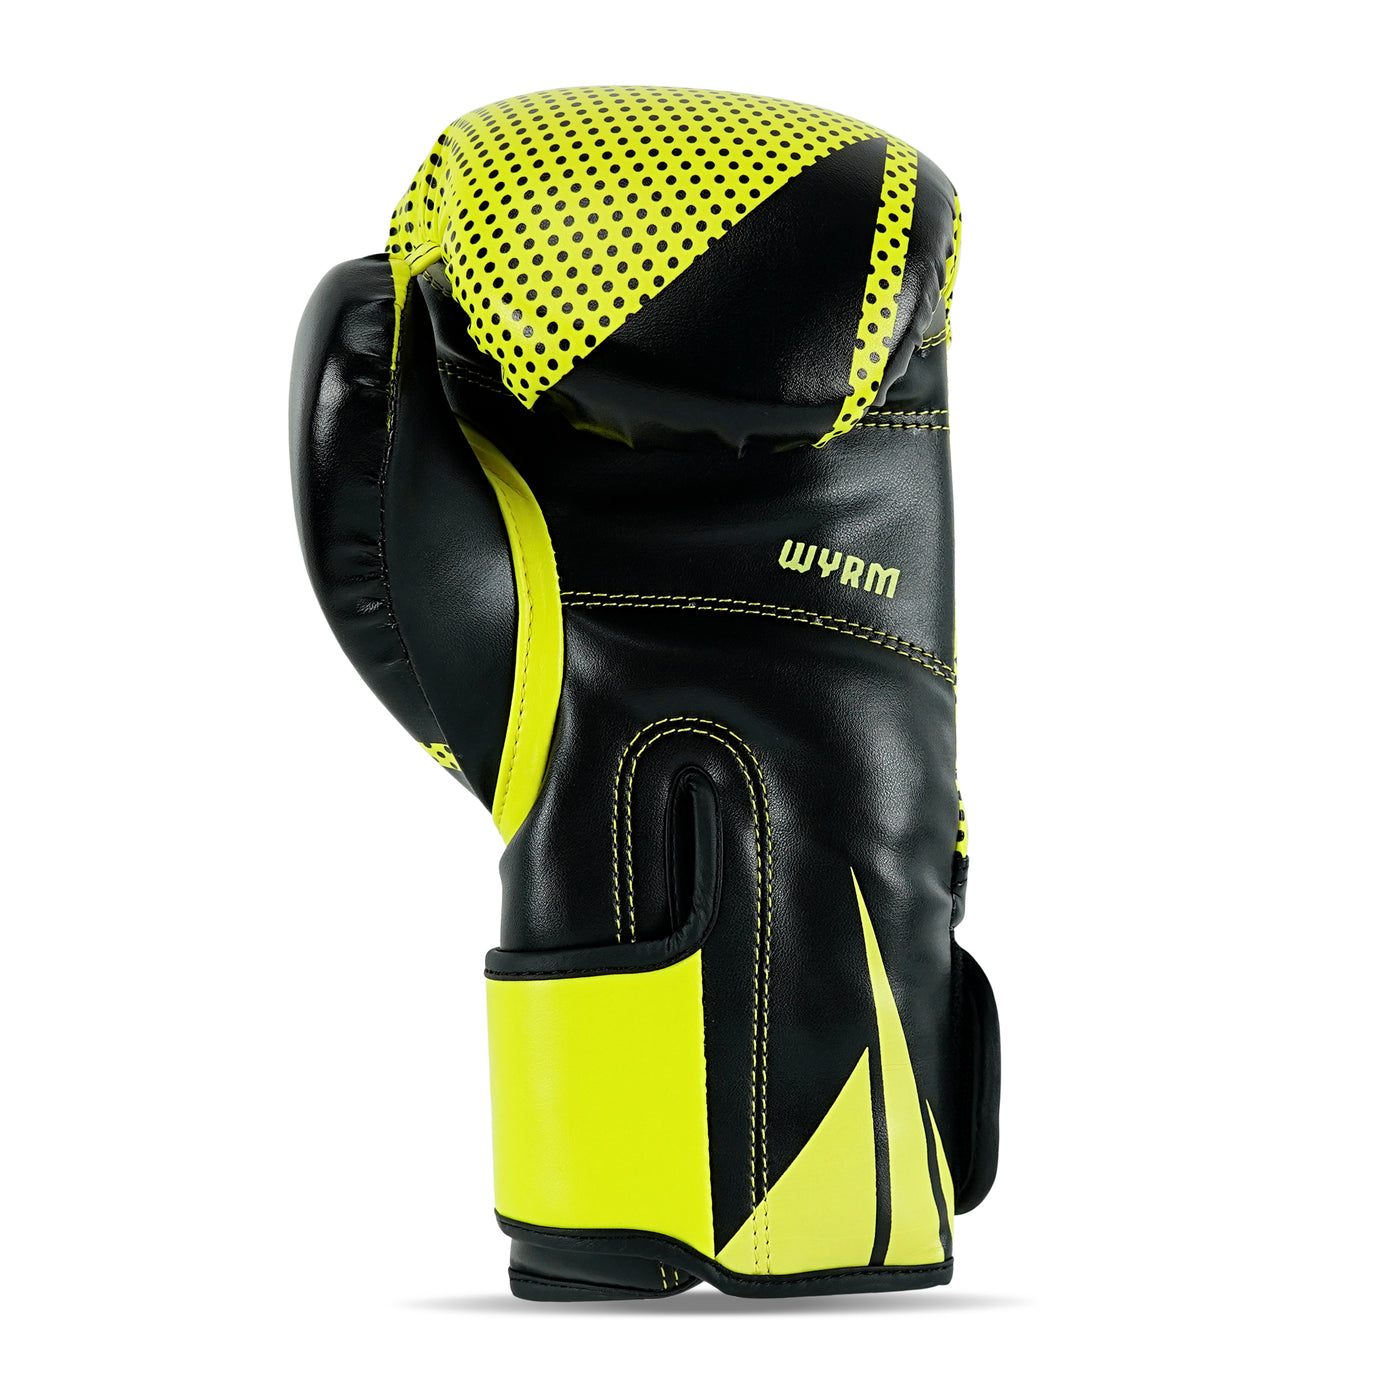 Krusher Yellow/Black Leather Boxing Gloves